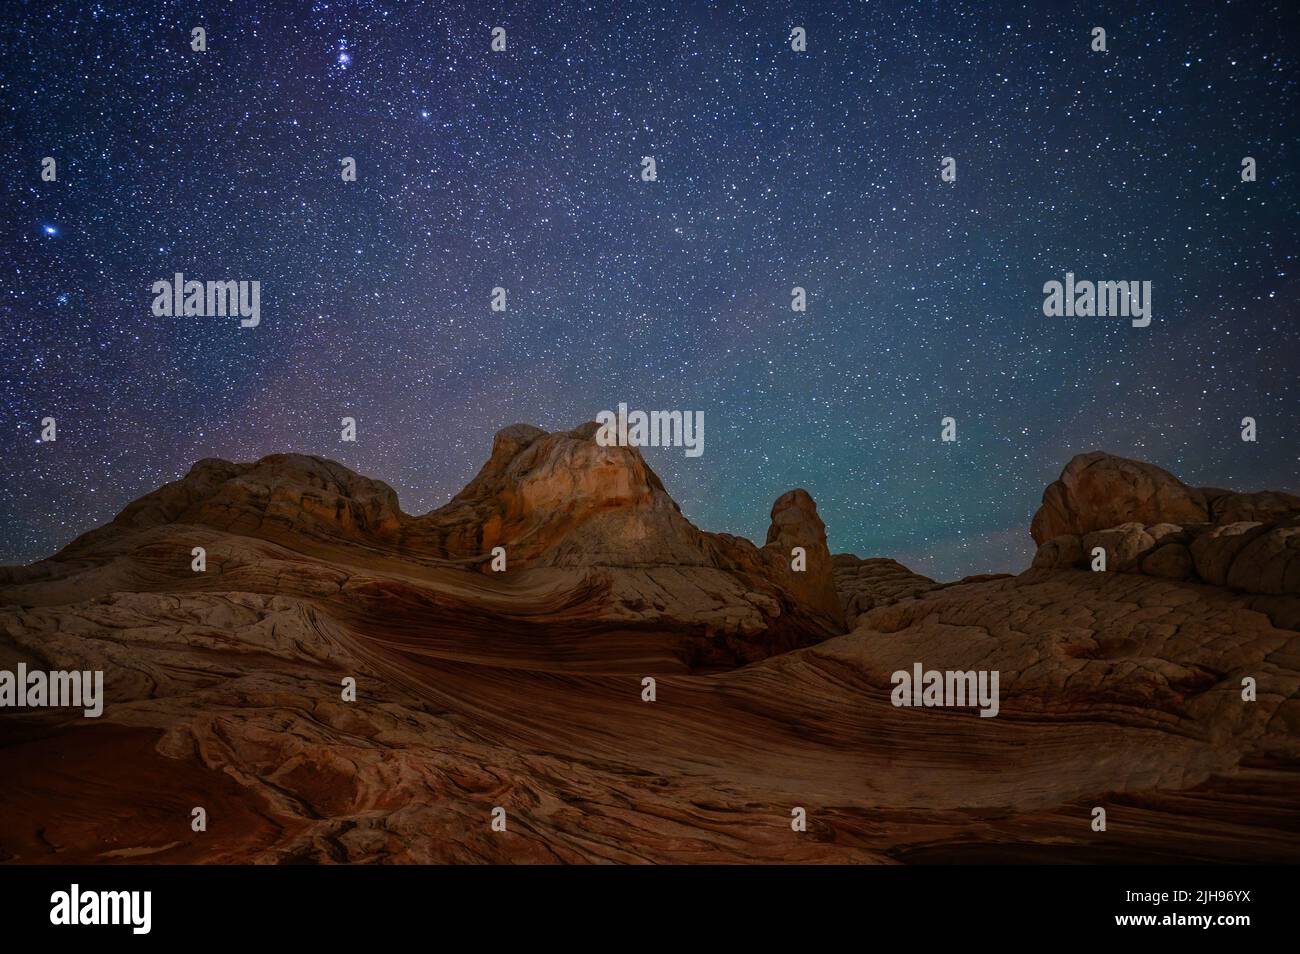 Stars over sandstone rock formations at White Pocket in Vermillion Cliffs National Monument, Arizona. Stock Photo